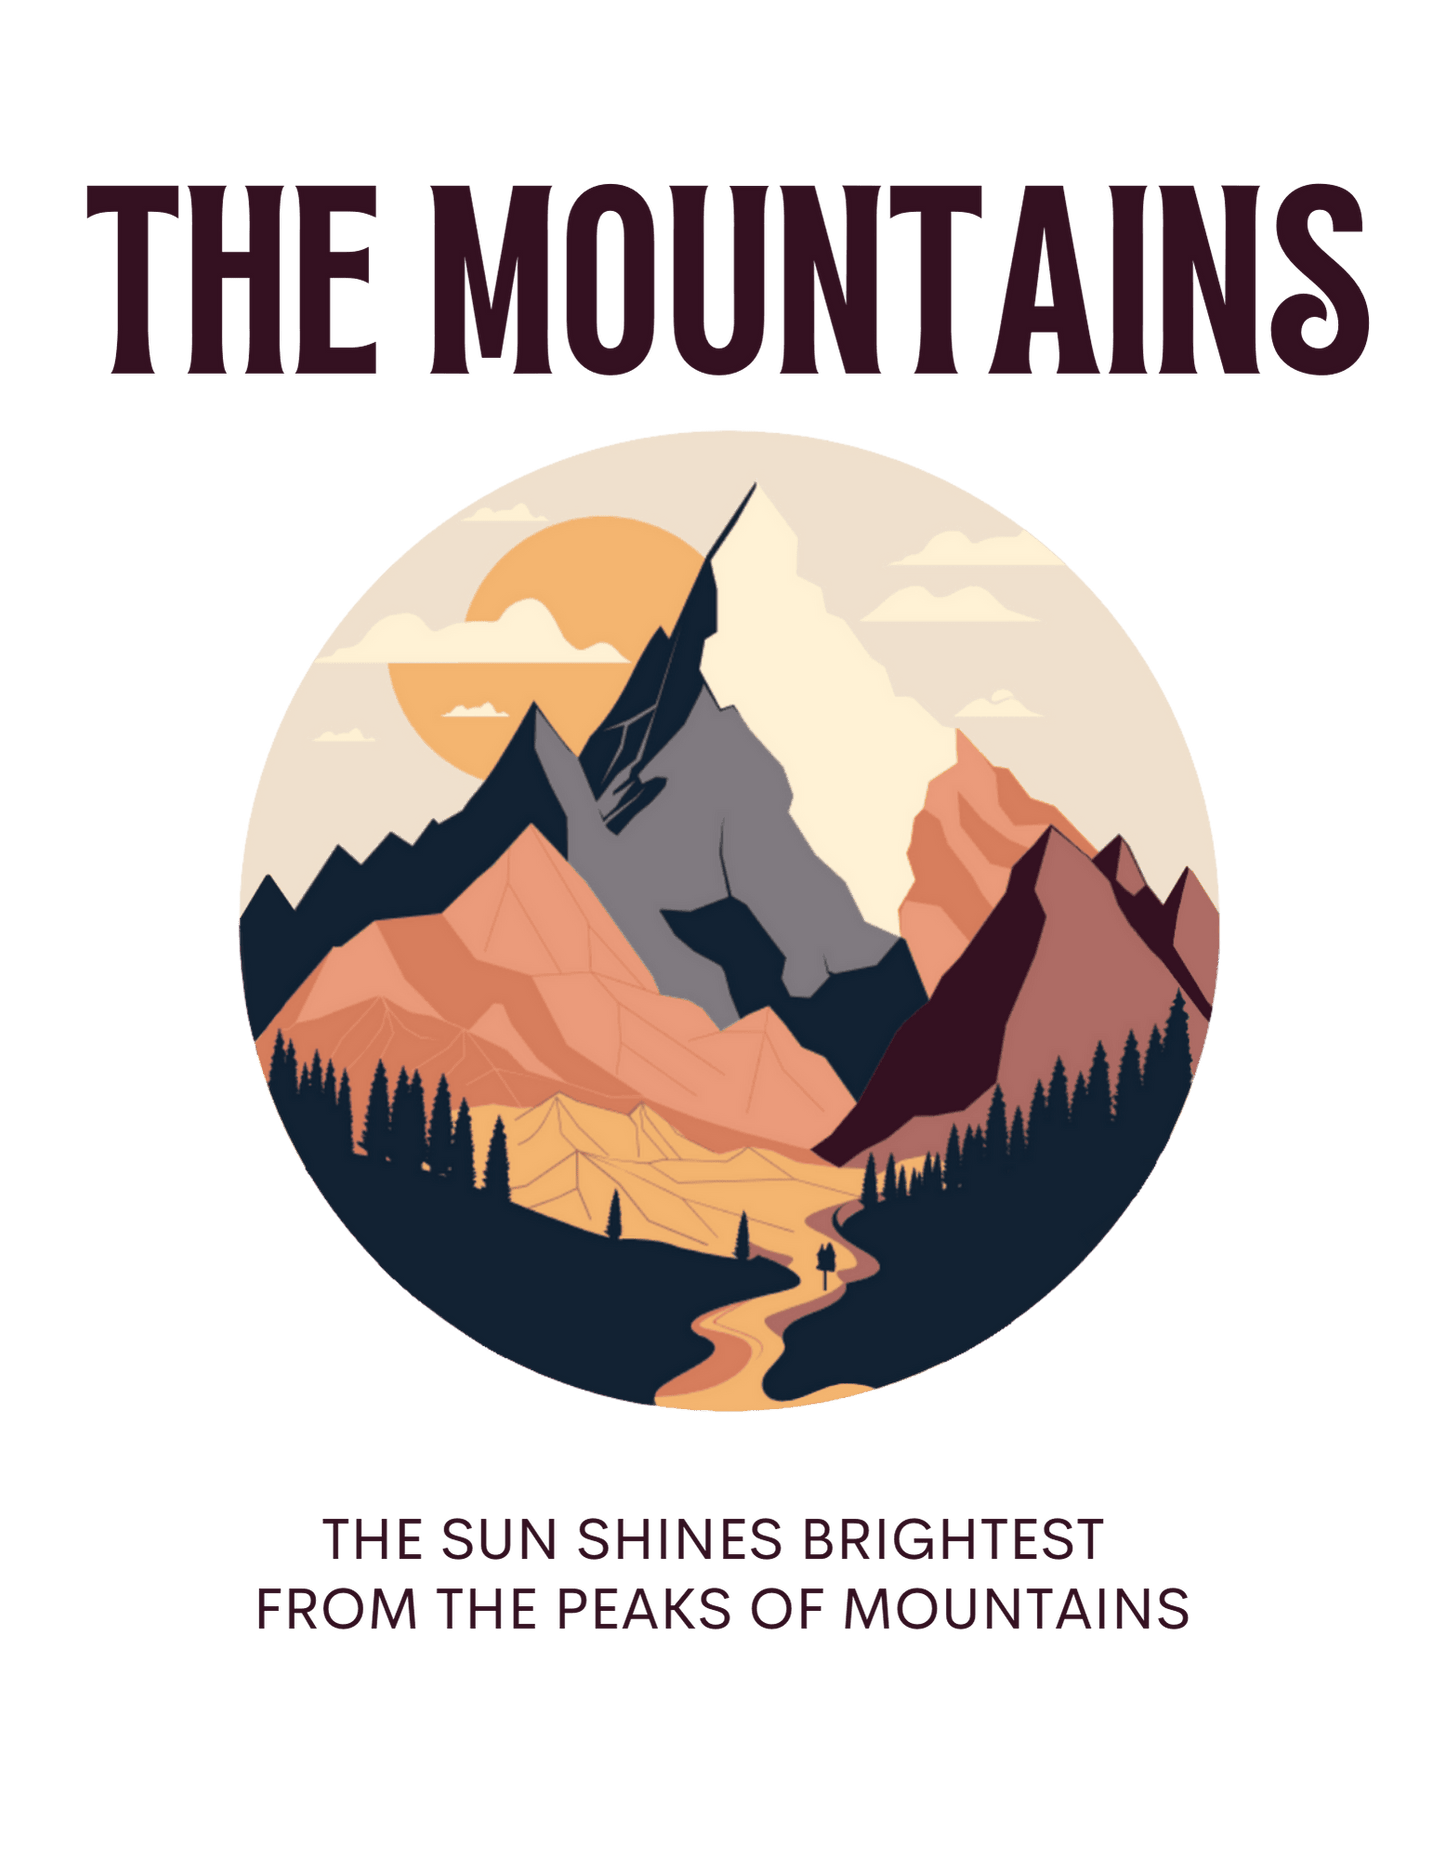 Travel mug with a handle 'The mountains. The sun shines brightest from the peaks of mountains'